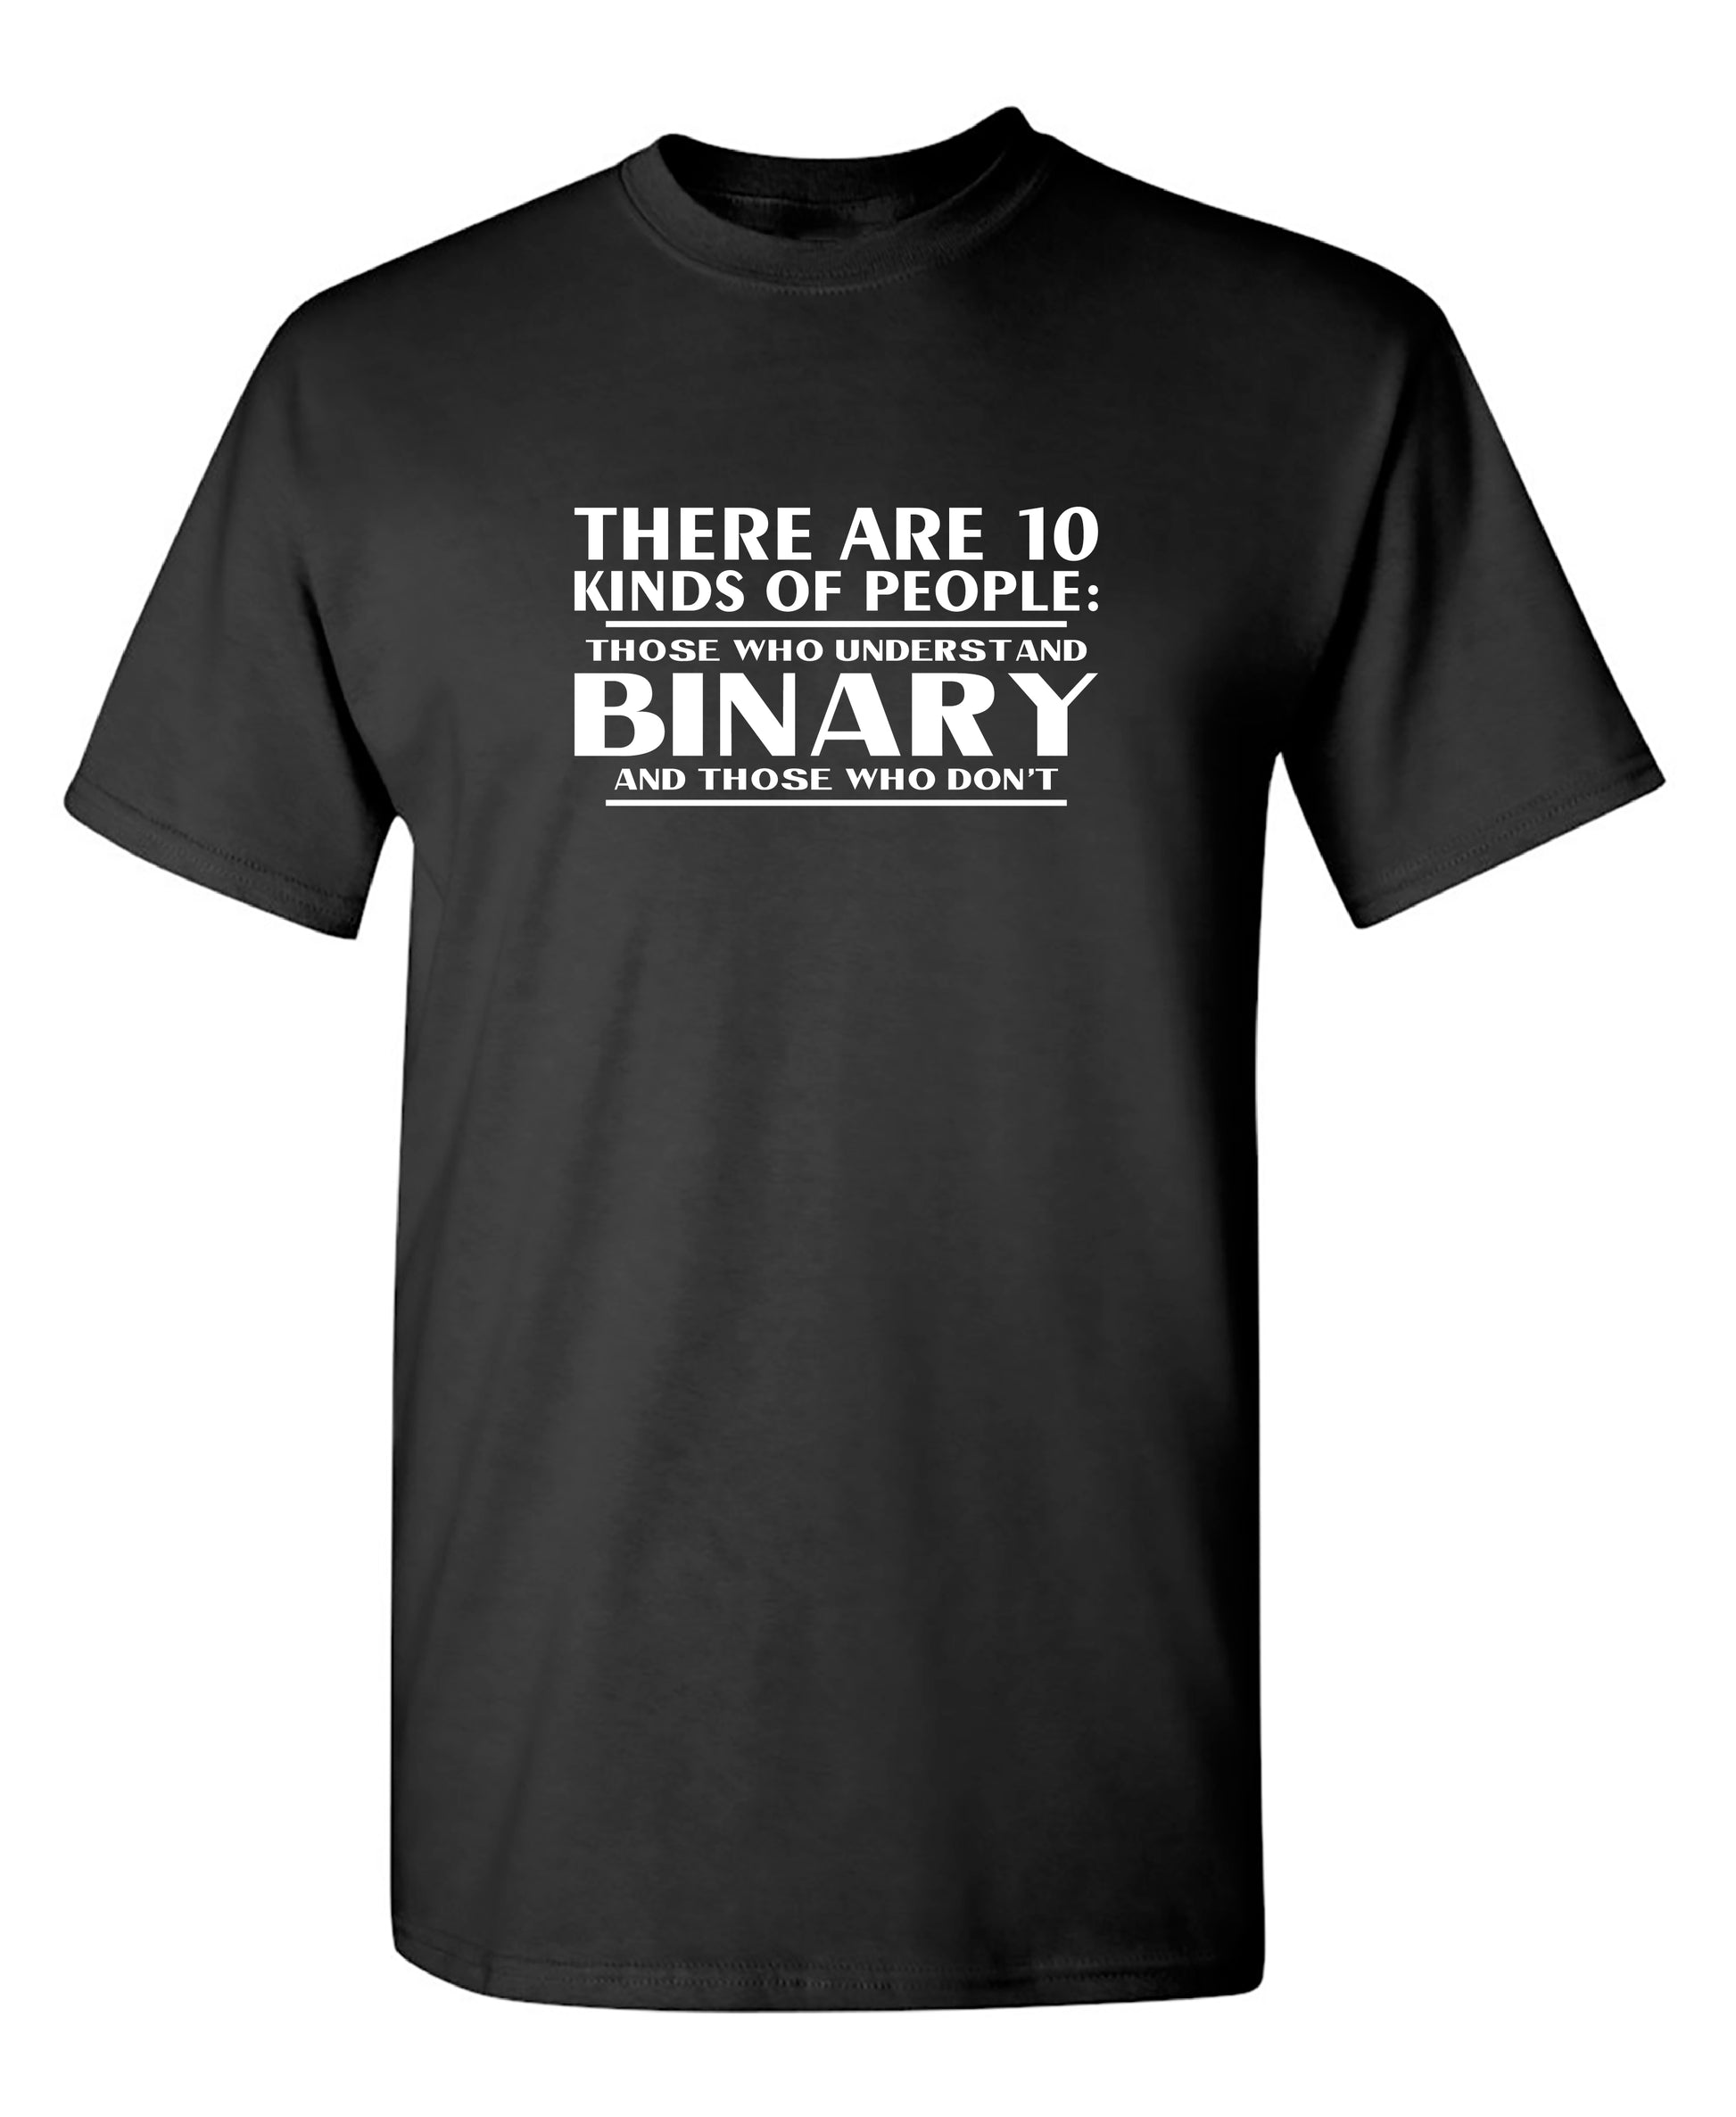 There Are 10 Kinds Of People Those Who Understand Binary And Those Who Don't - Funny T Shirts & Graphic Tees